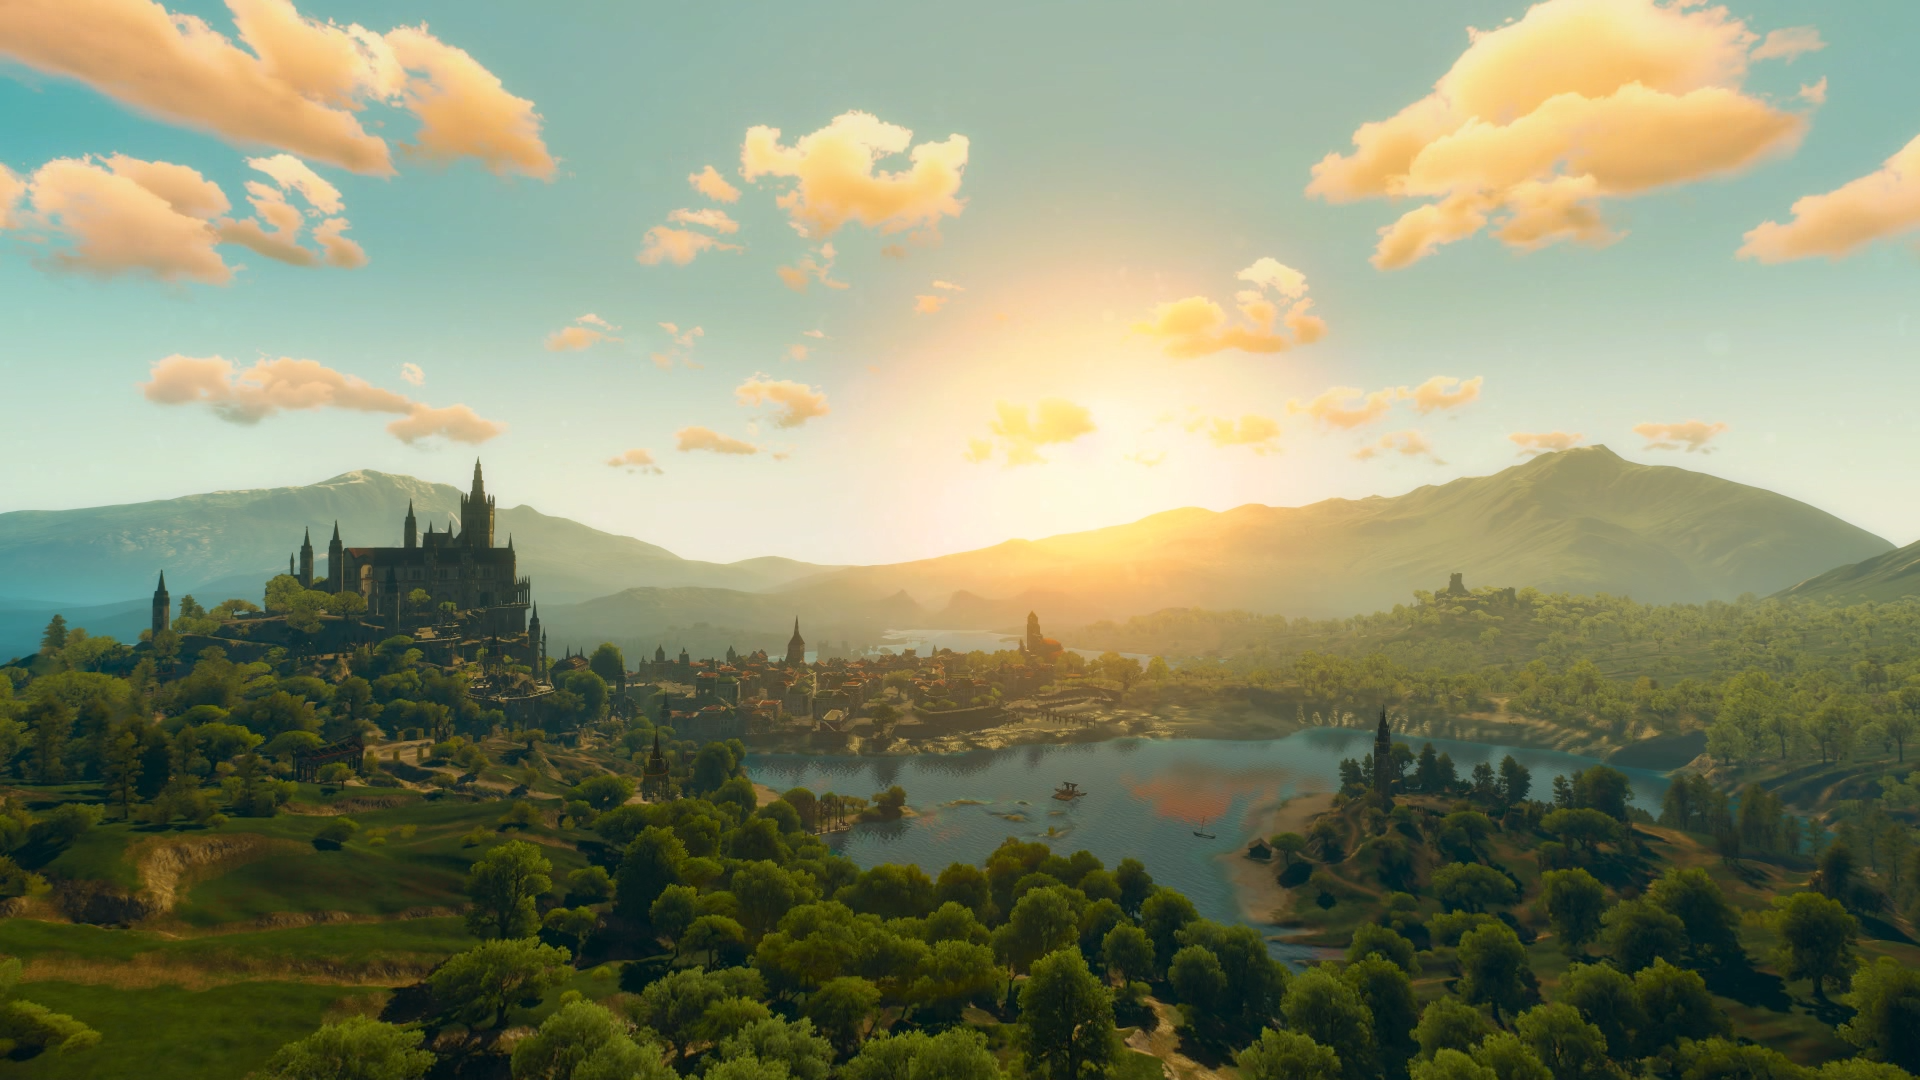 The Witcher The Witcher 3 The Witcher 3 Wild Hunt Blood And Wine Toussaint Sunset CD Projekt RED Scr 1920x1080